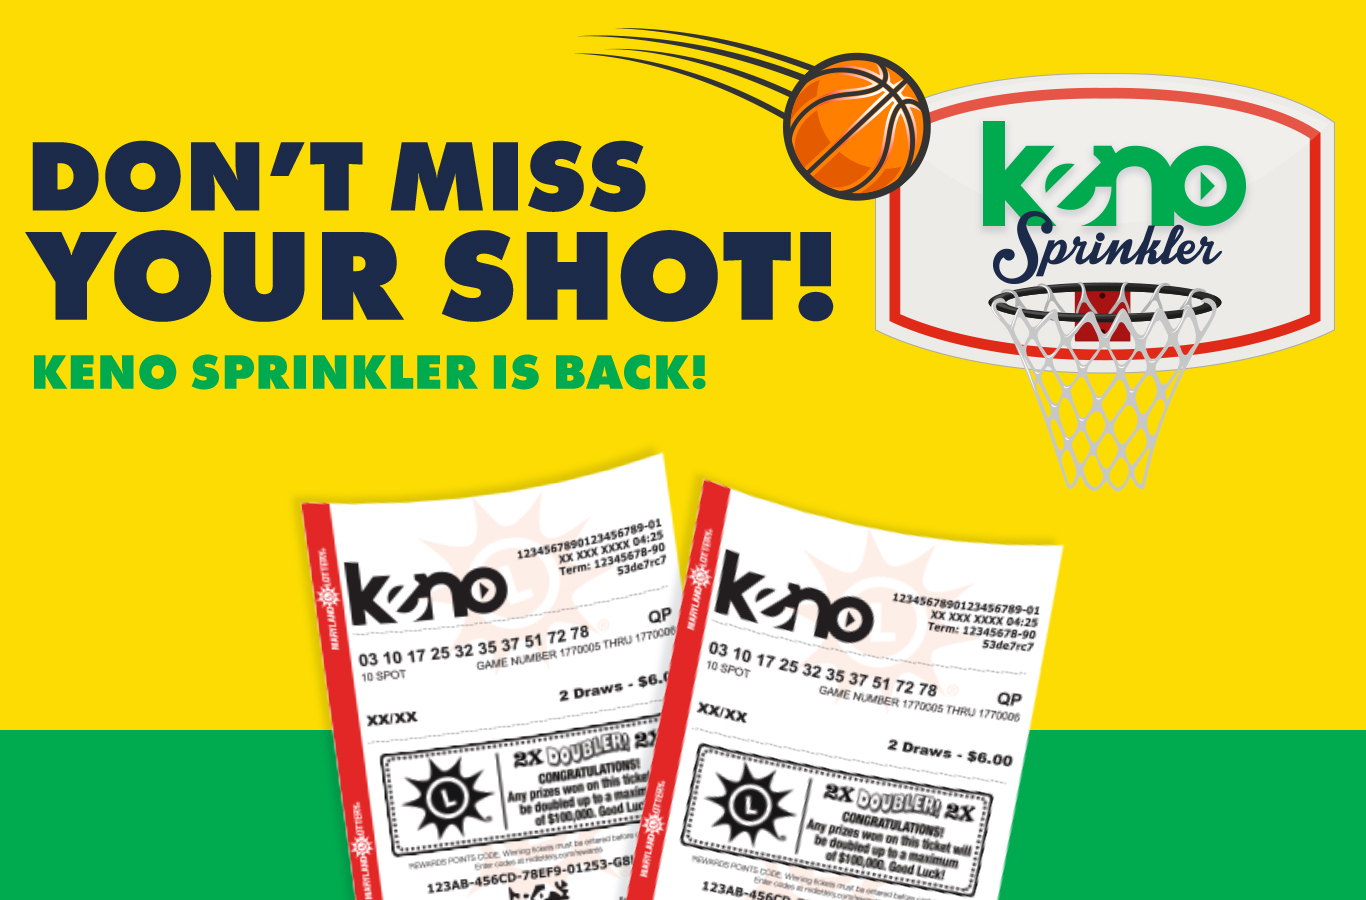 Keno Sprinkler gives you the chance to win 2x or 3X your prize!